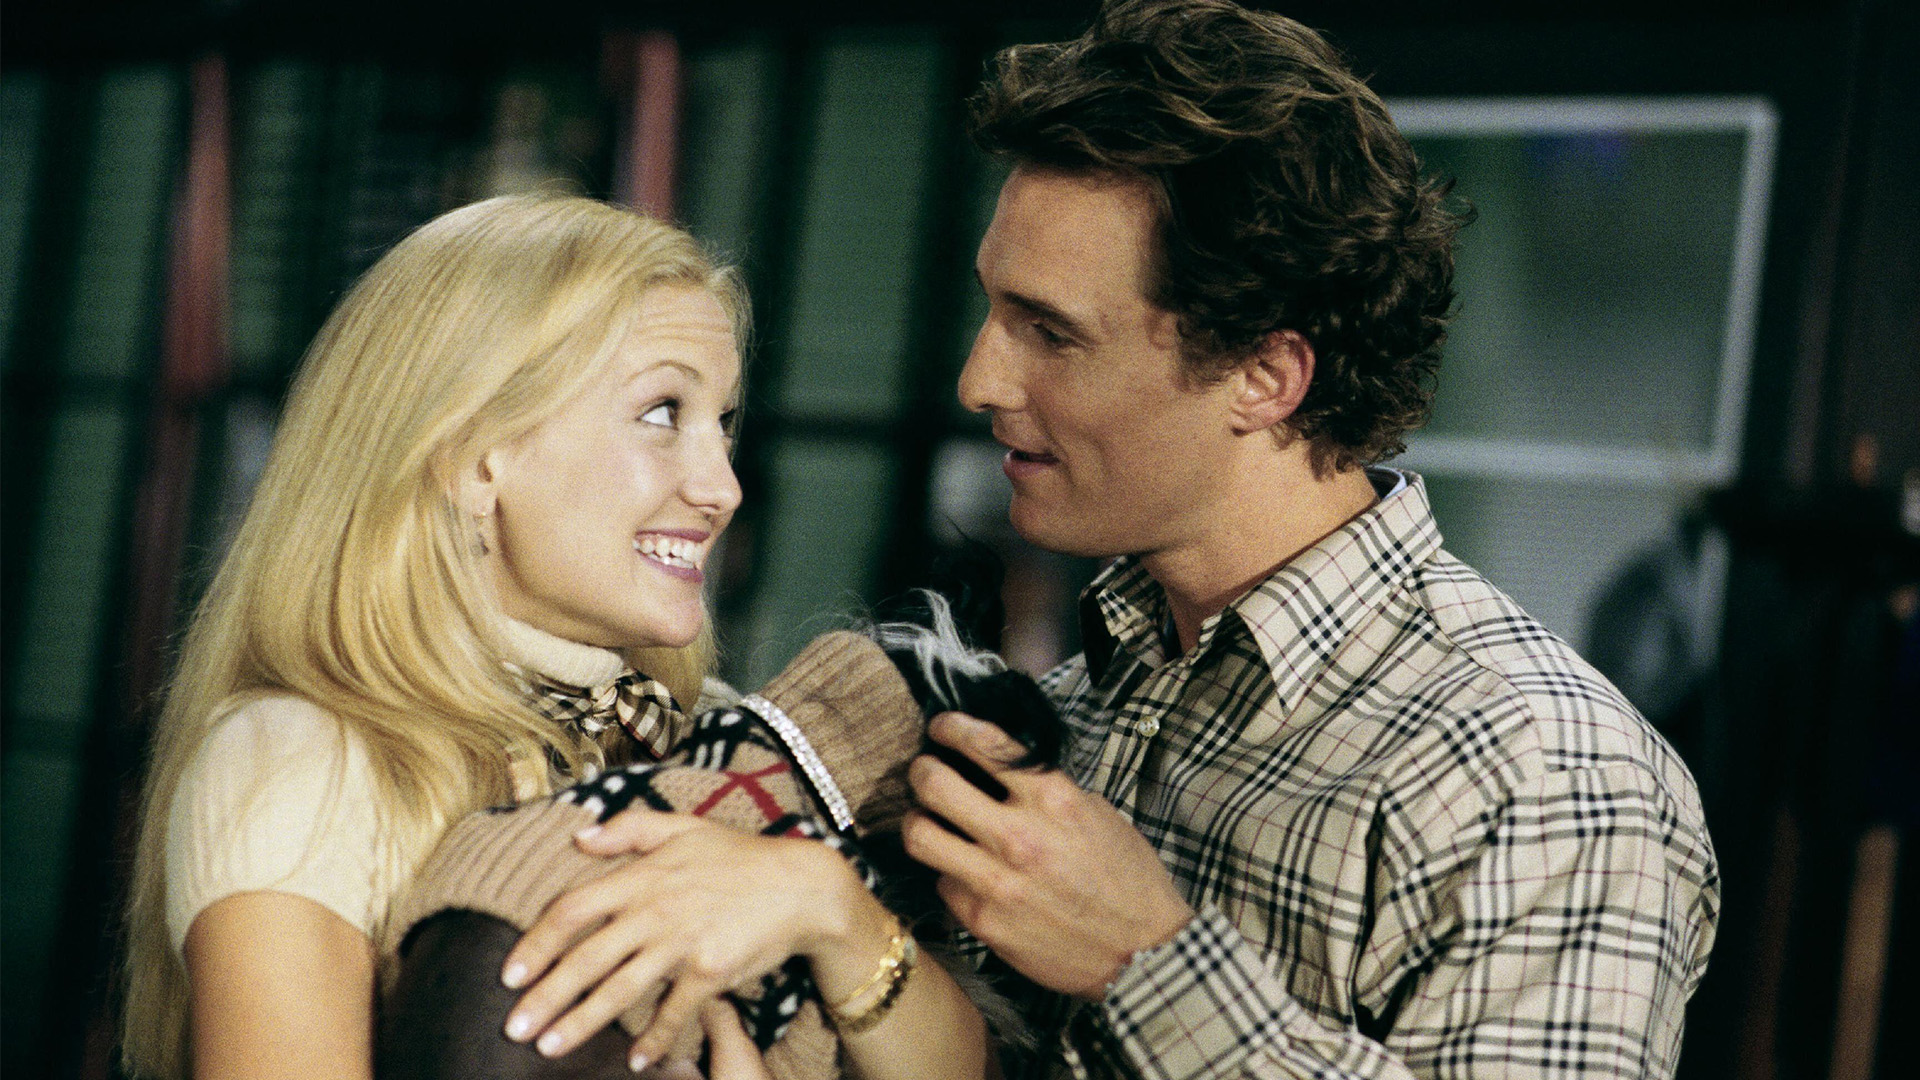 (L to R) Kate Hudson as Andy holding a dog and watching Matthew McConaughey as Ben